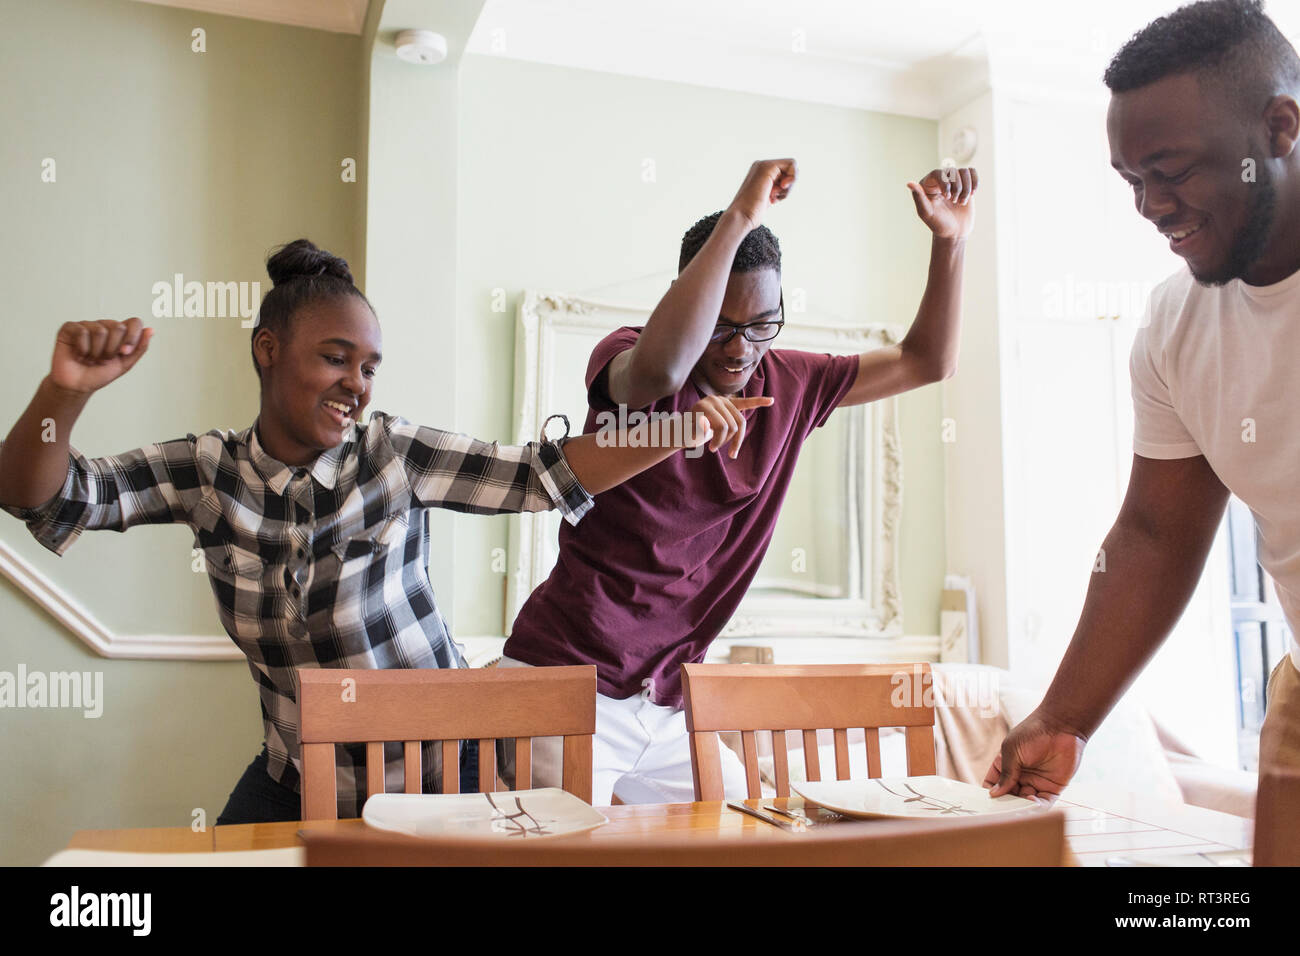 Playful teenage brother and sister dancing in dining room Stock Photo